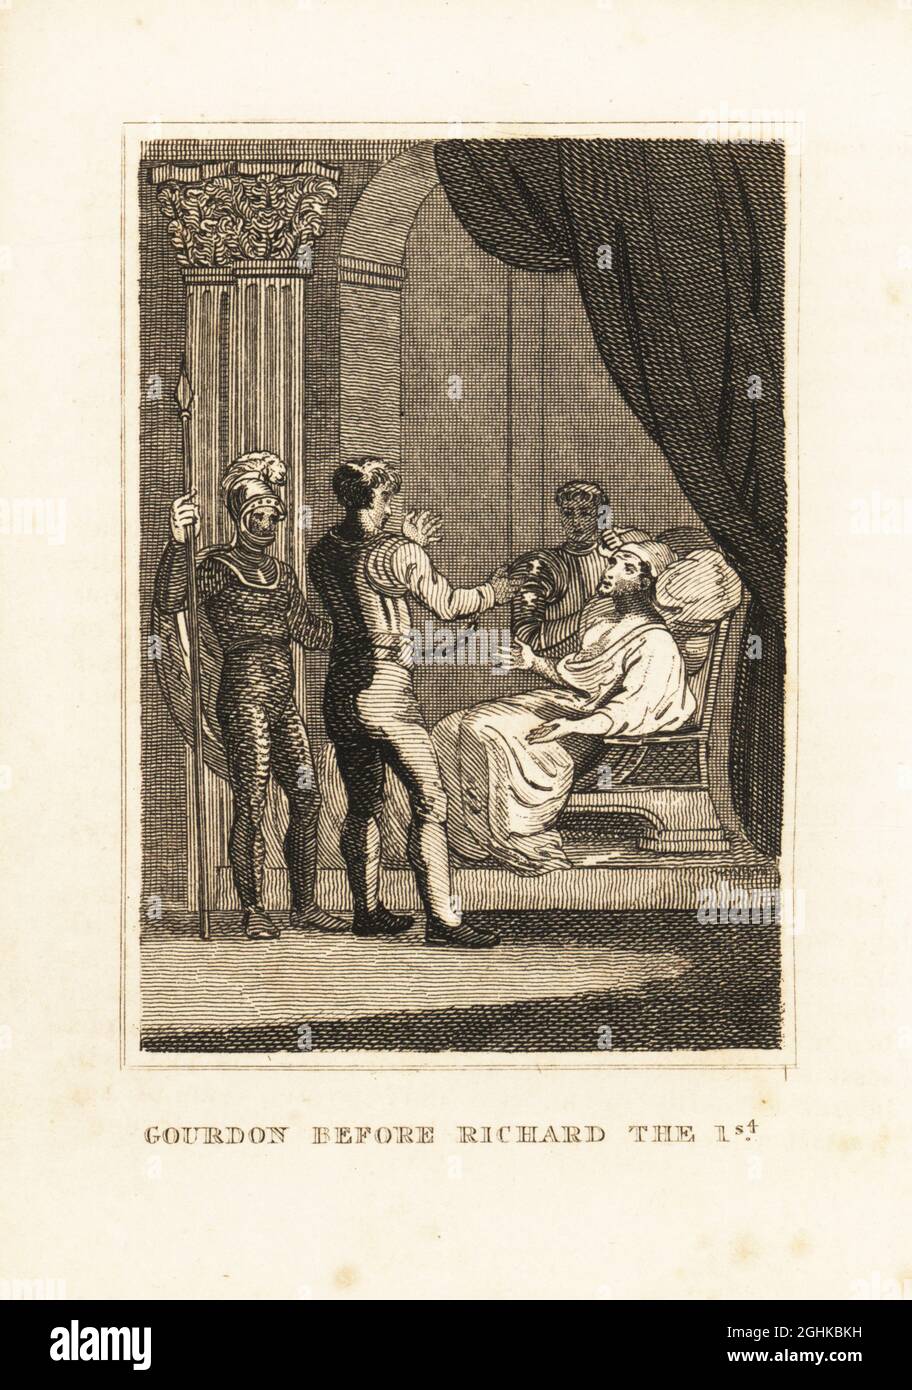 King Richard I, mortally wounded, meets the archer Bertram de Gourdon who shot him, Limousin, 1199. Richard on a chair, the prisoner in shackles with a guard in chainmail armour, Gourdon before Richard I. Copperplate engraving from M. A. Jones’ History of England from Julius Caesar to George IV, G. Virtue, 26 Ivy Lane, London, 1836. Stock Photo